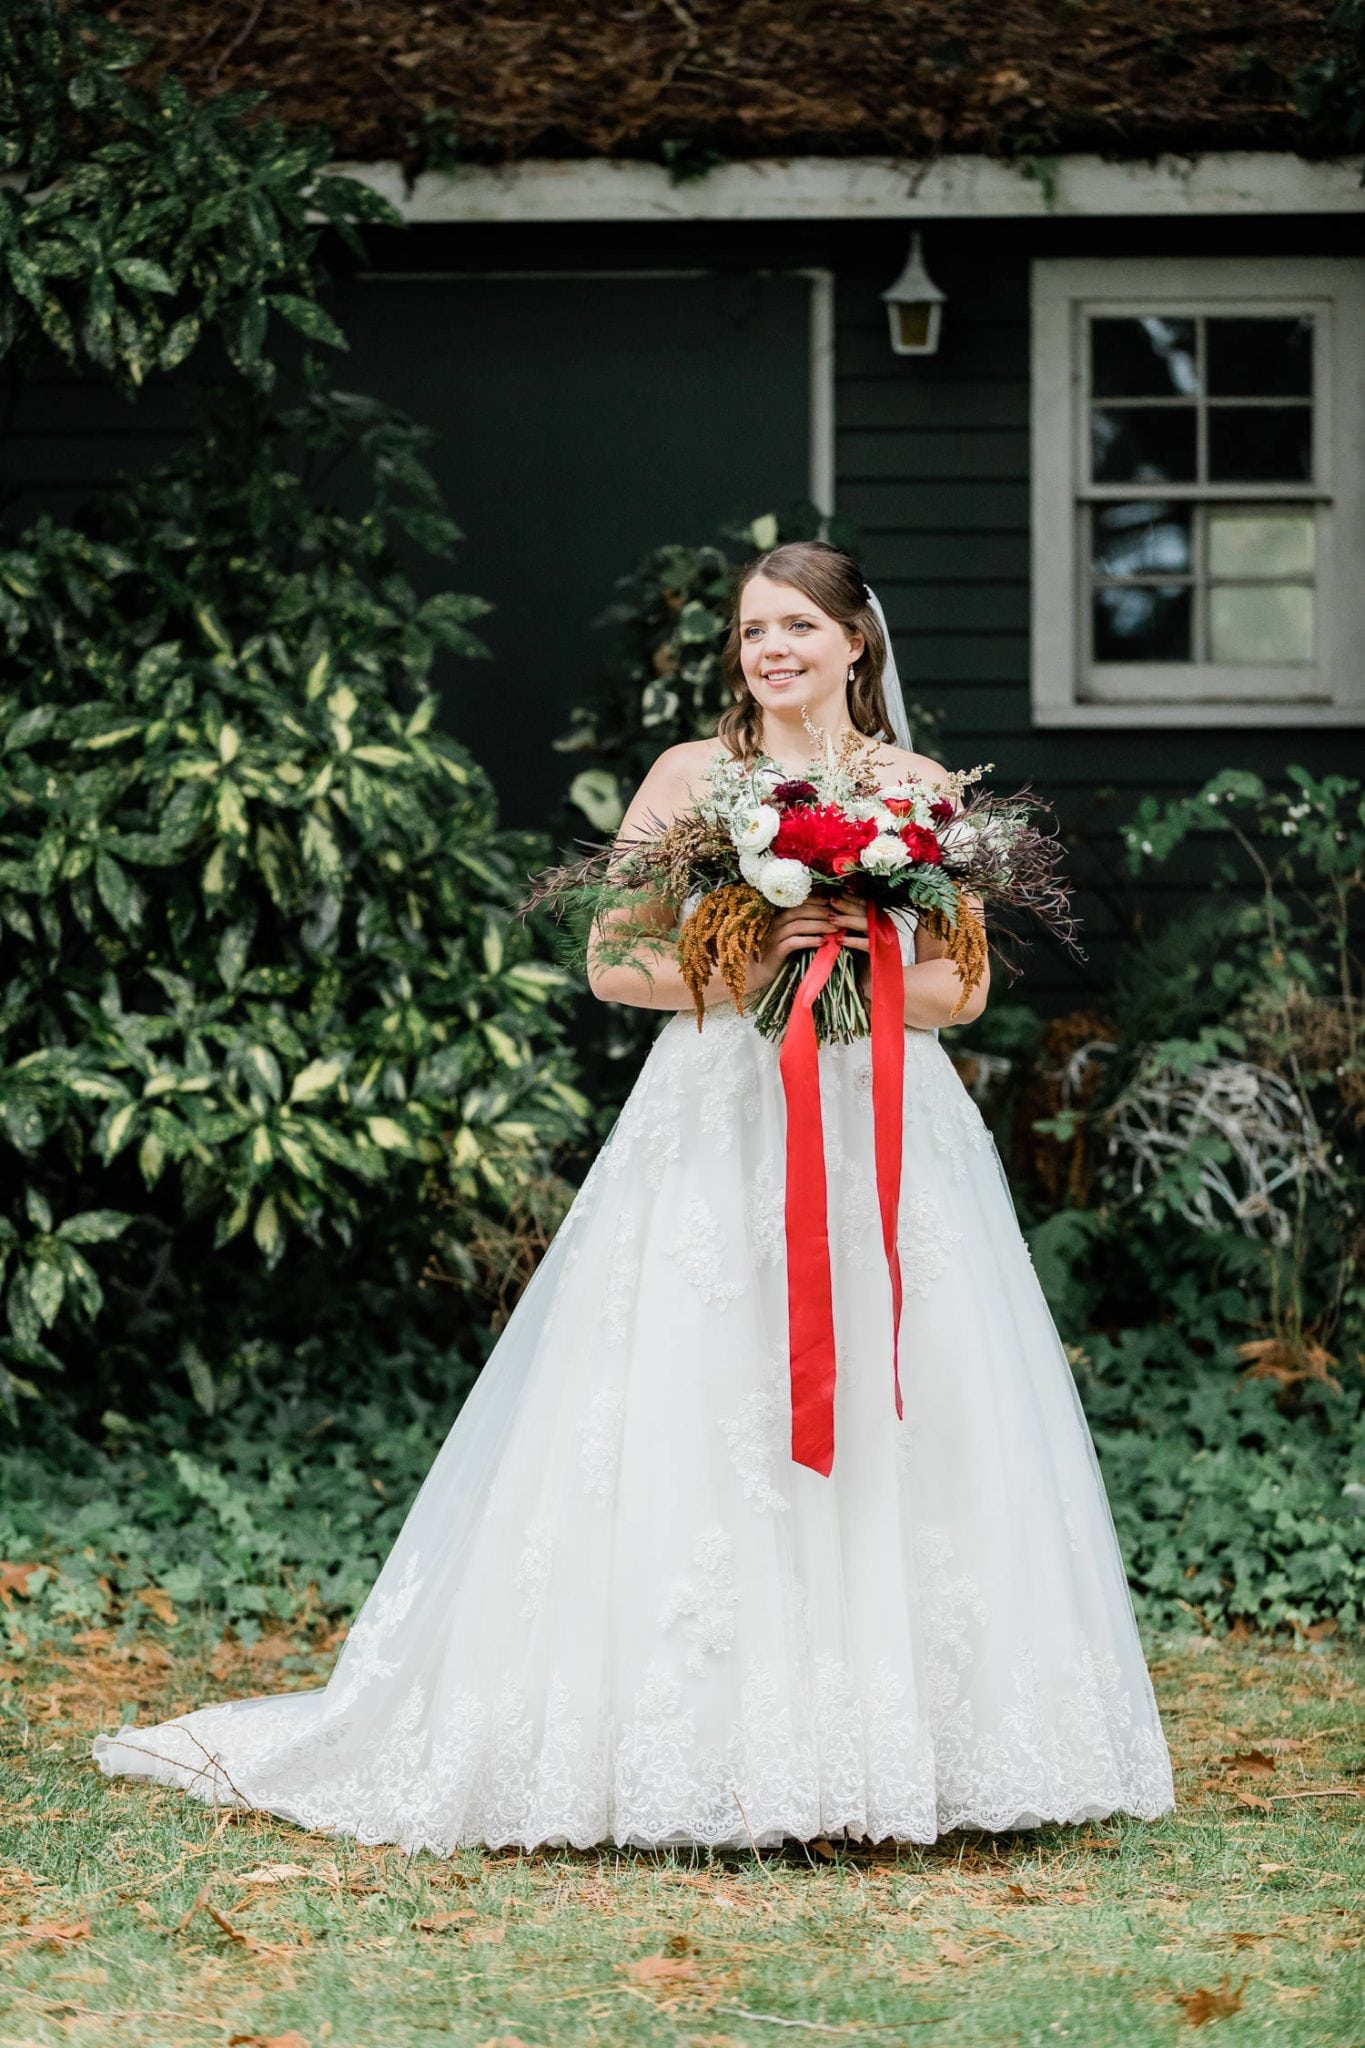 Rustic backyard wedding picture with bride | Vancouver wedding photographer